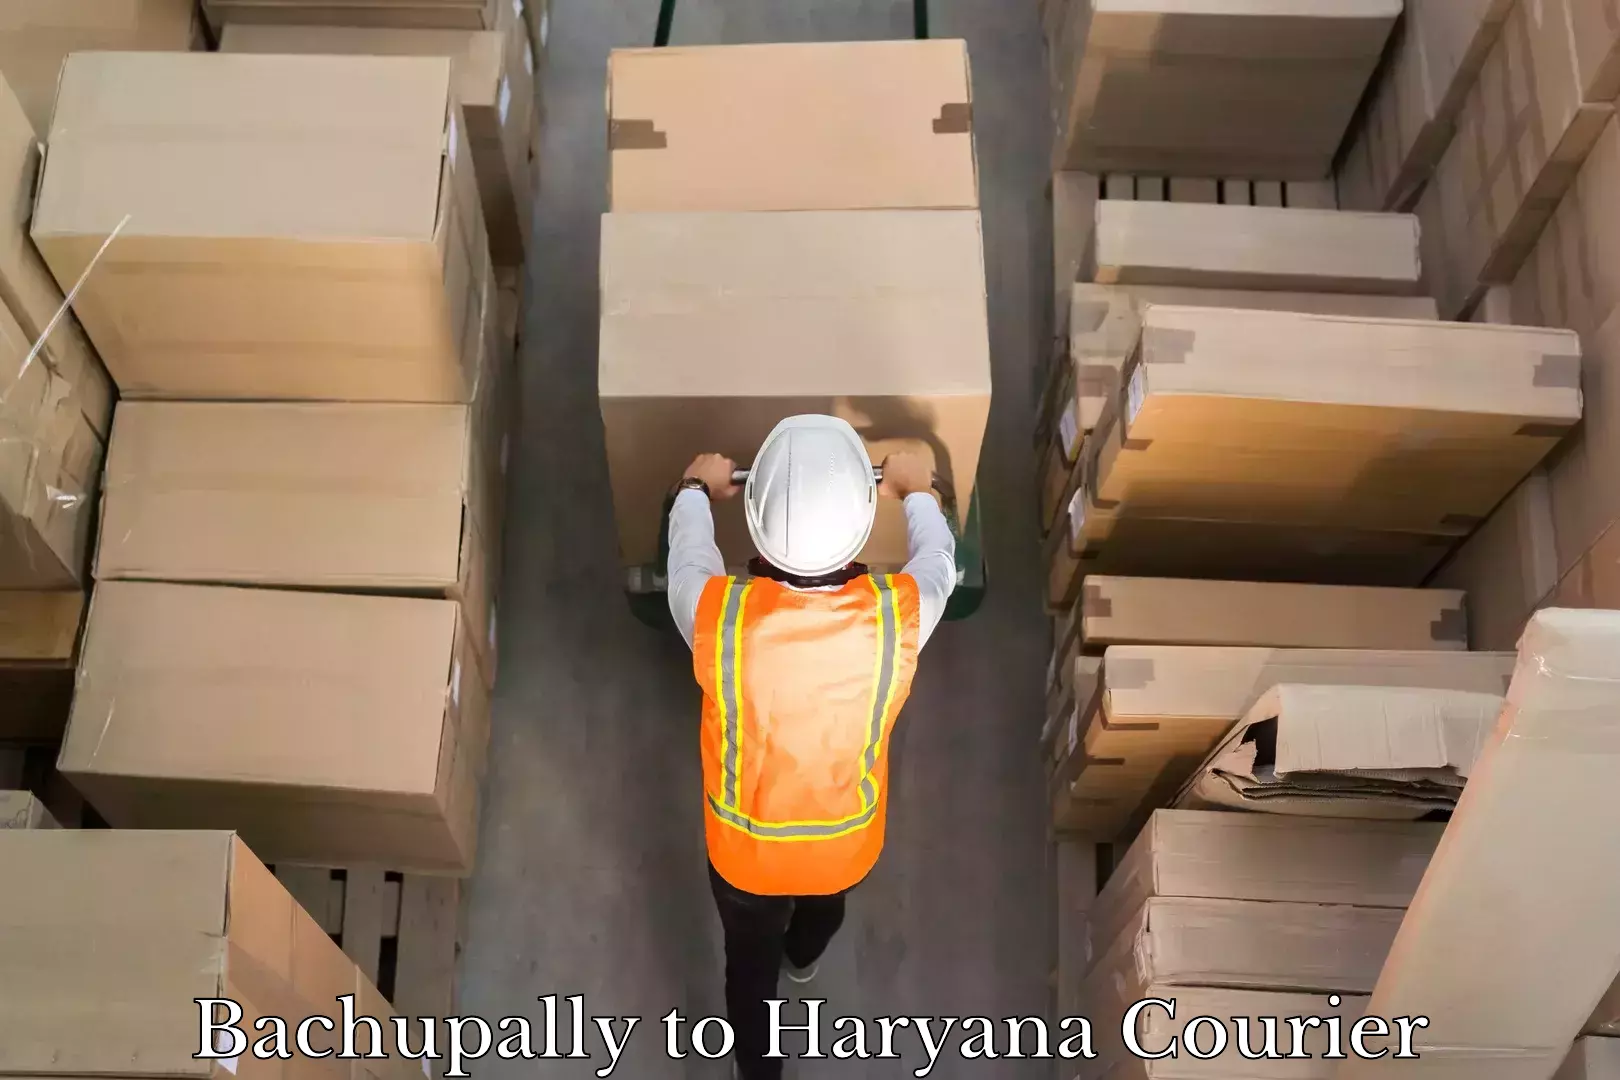 Flexible delivery schedules Bachupally to Haryana